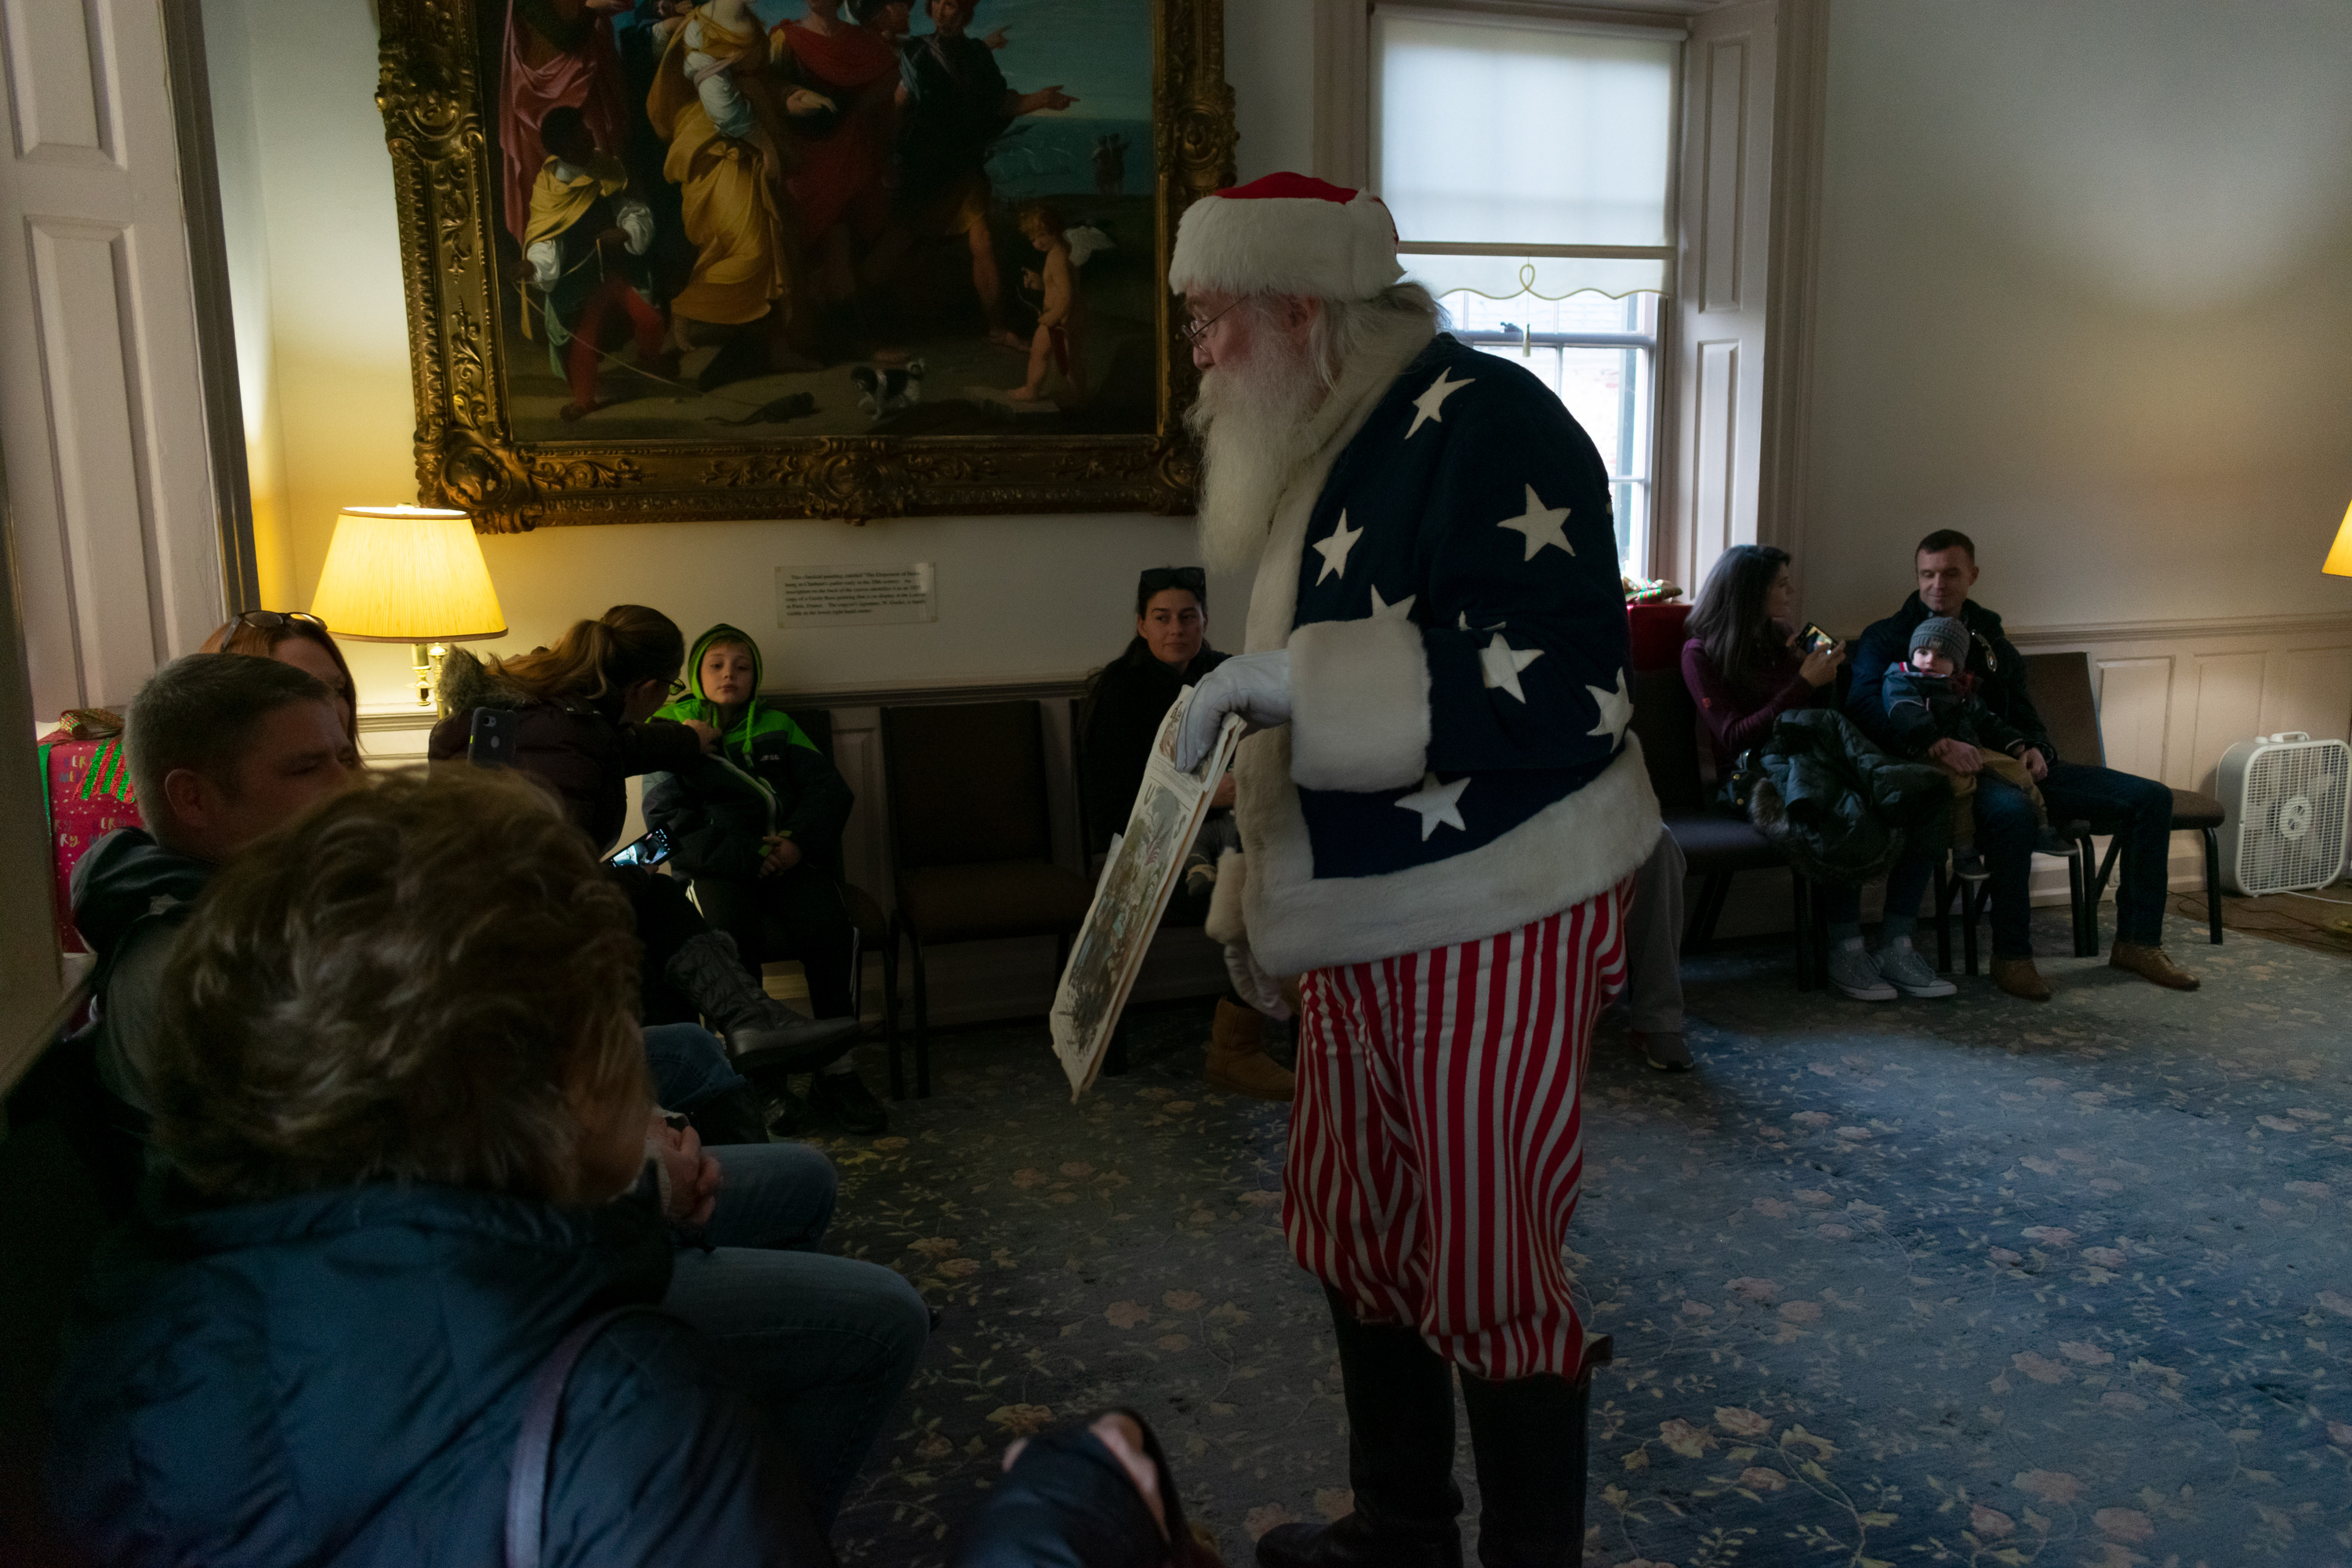 Santa Claus shows a picture to a group of visitors.